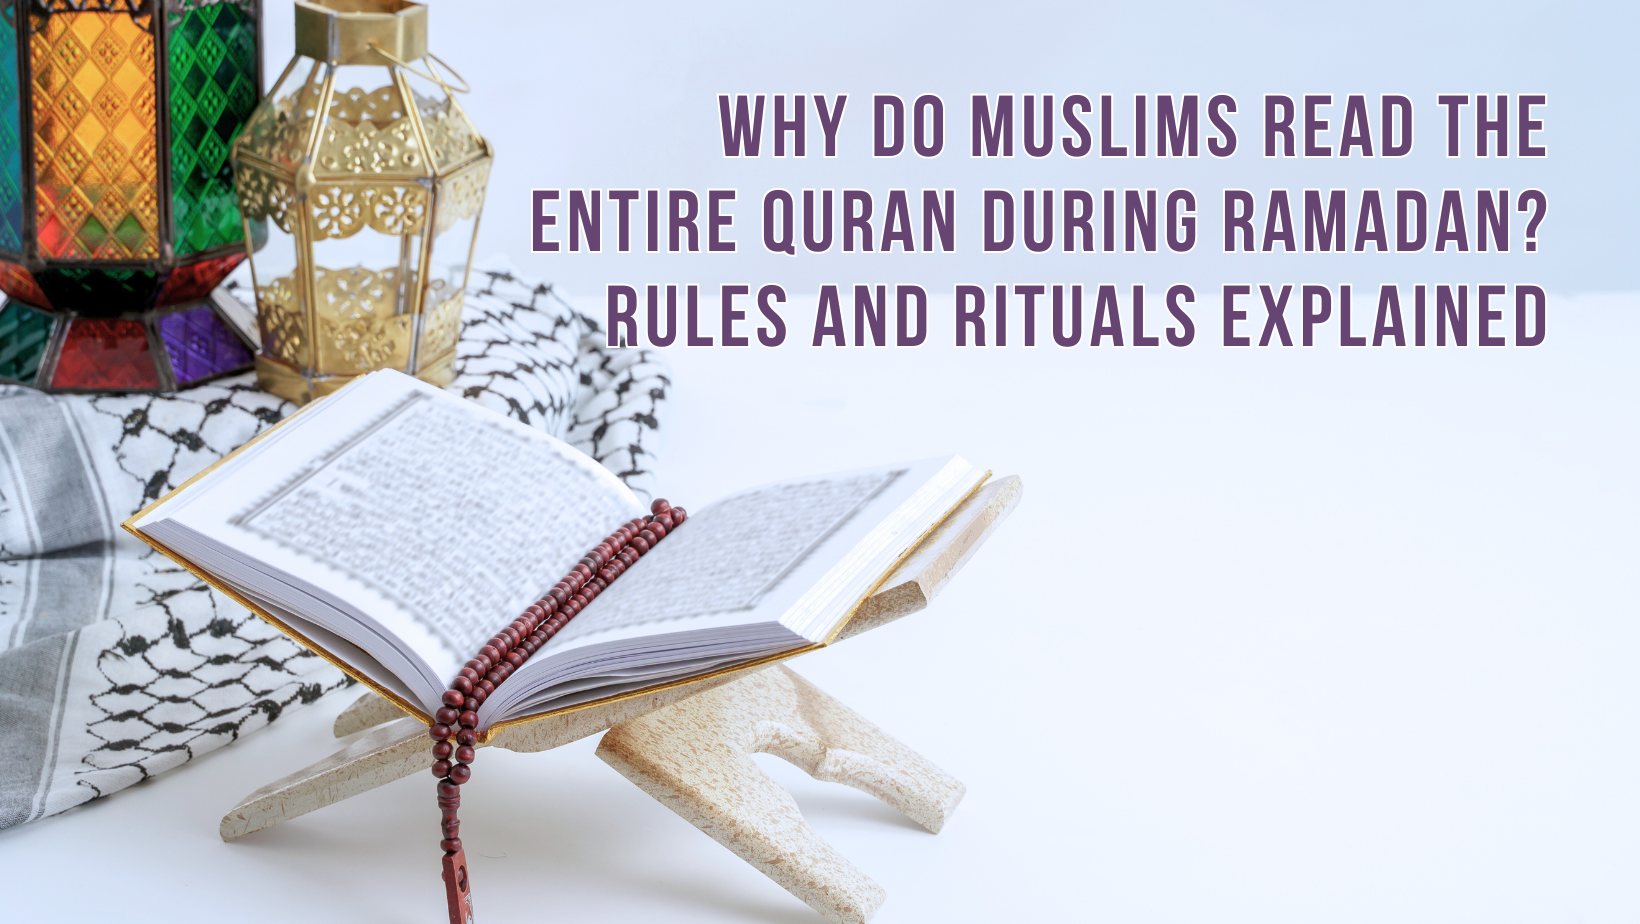 Why do Muslims read the entire Quran during Ramadan?